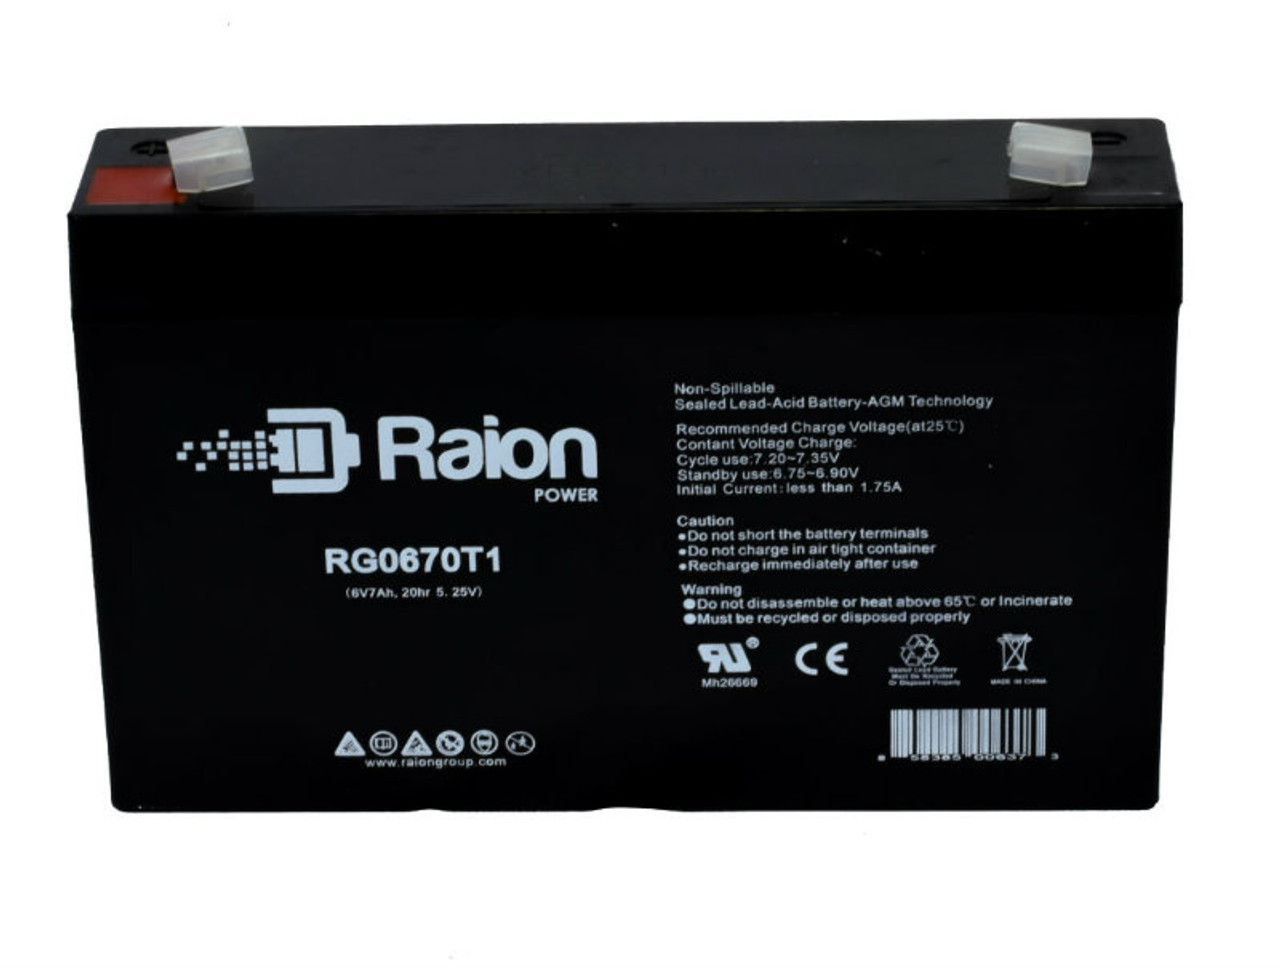 Raion Power RG0670T1 Replacement Battery Cartridge for GS Portalac PE6V6.5